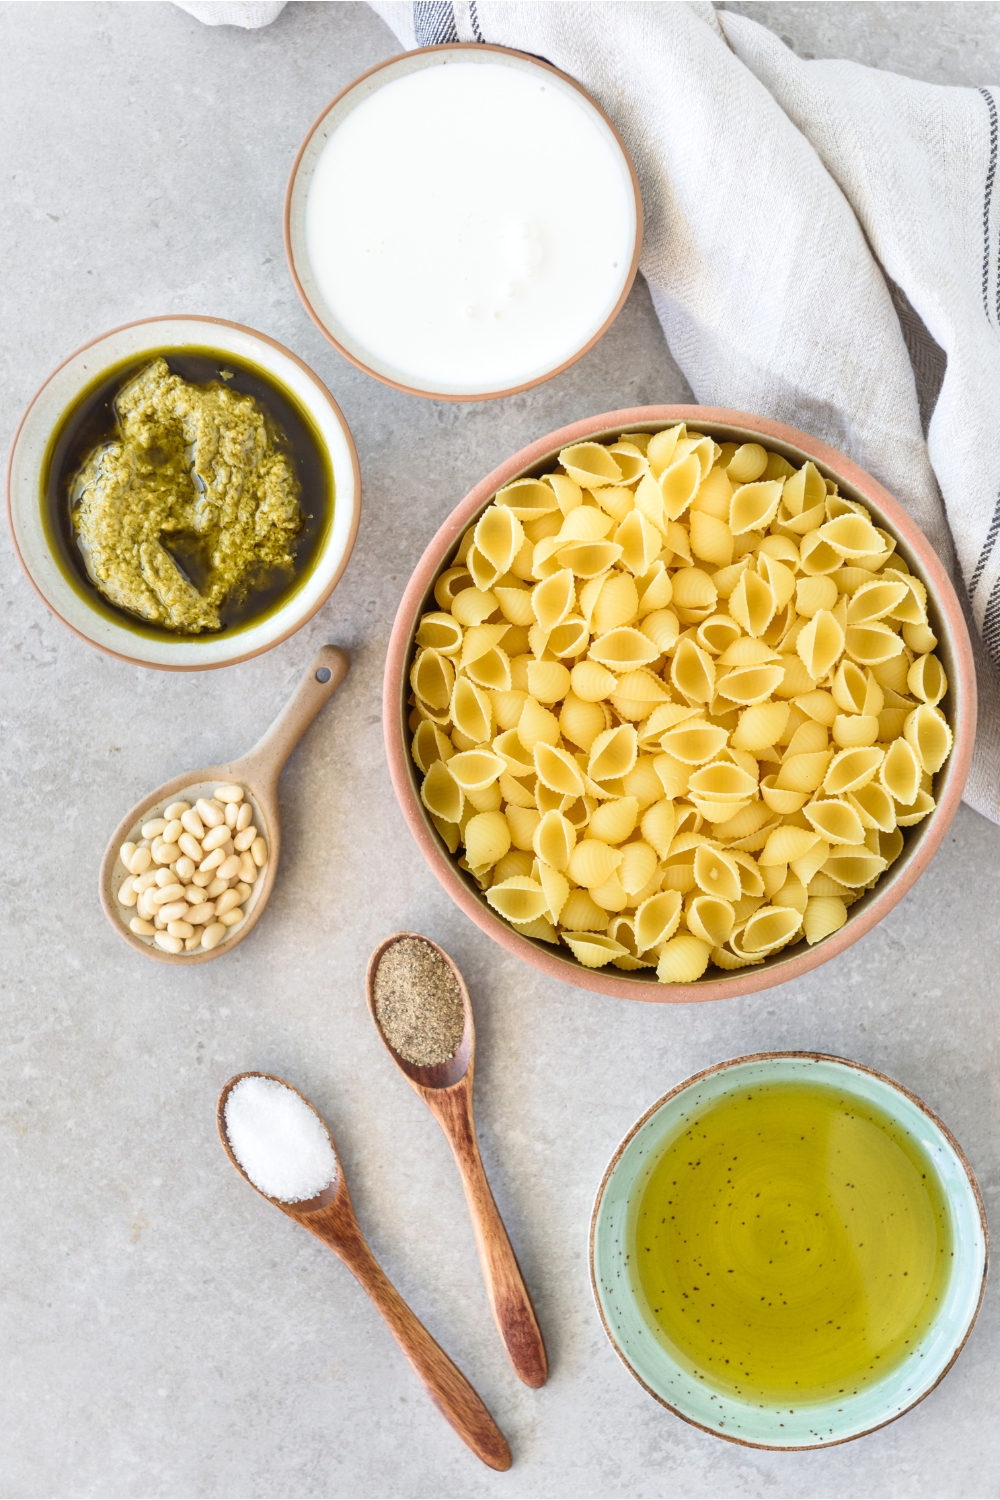 A countertop with pasta shells, pesto, pine nuts, heavy cream, oil, and salt and pepper.